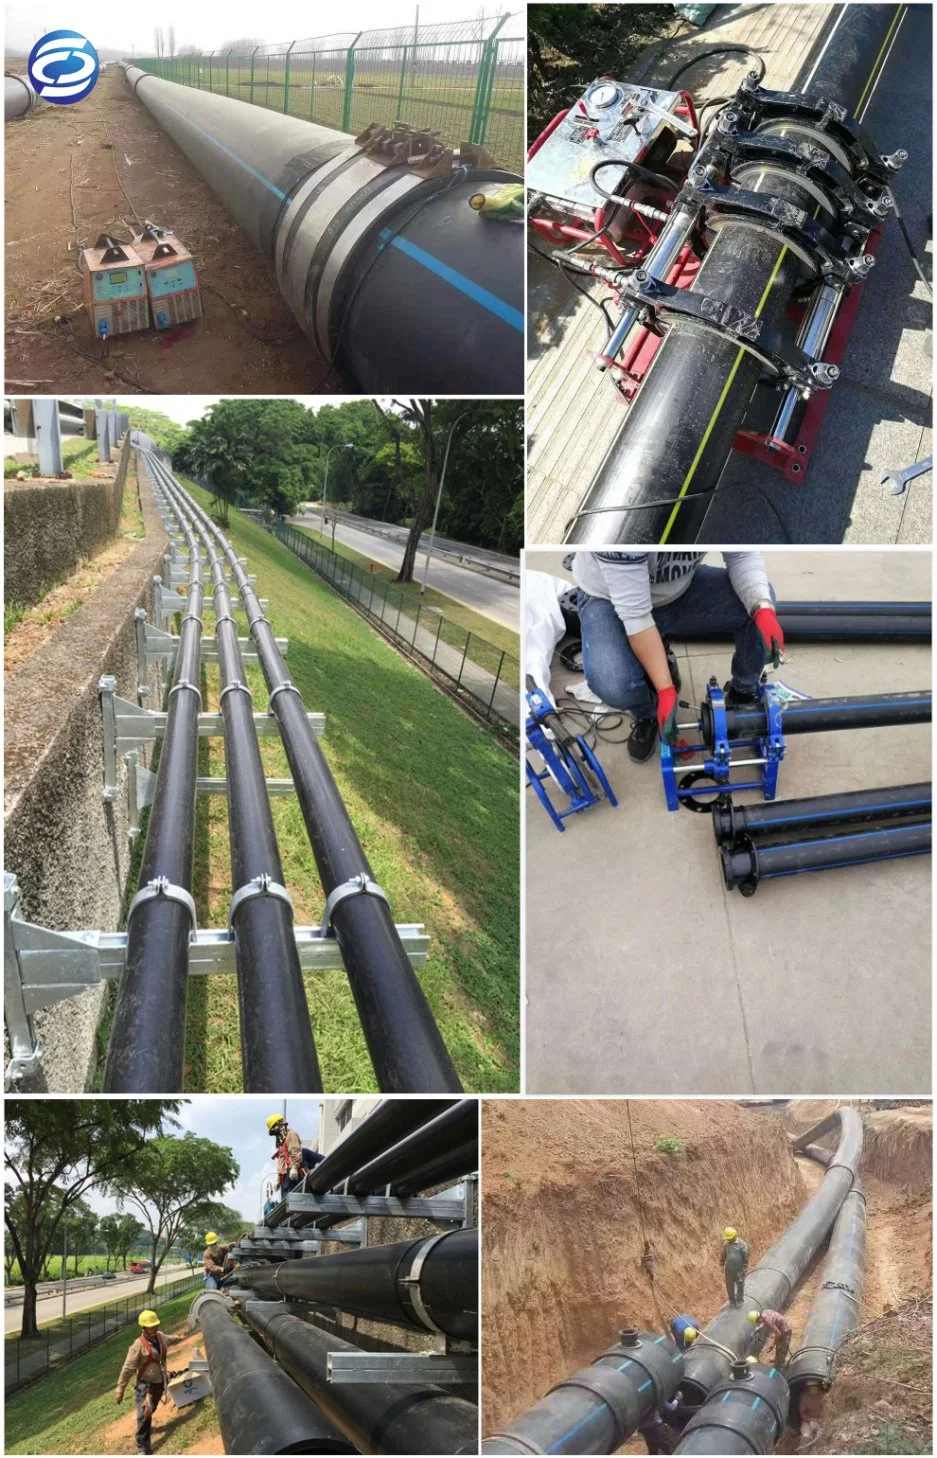 China Manufacture Poly PE100 High Quality HDPE Pipe High Density Polyethylene 200mm HDPE Pipe